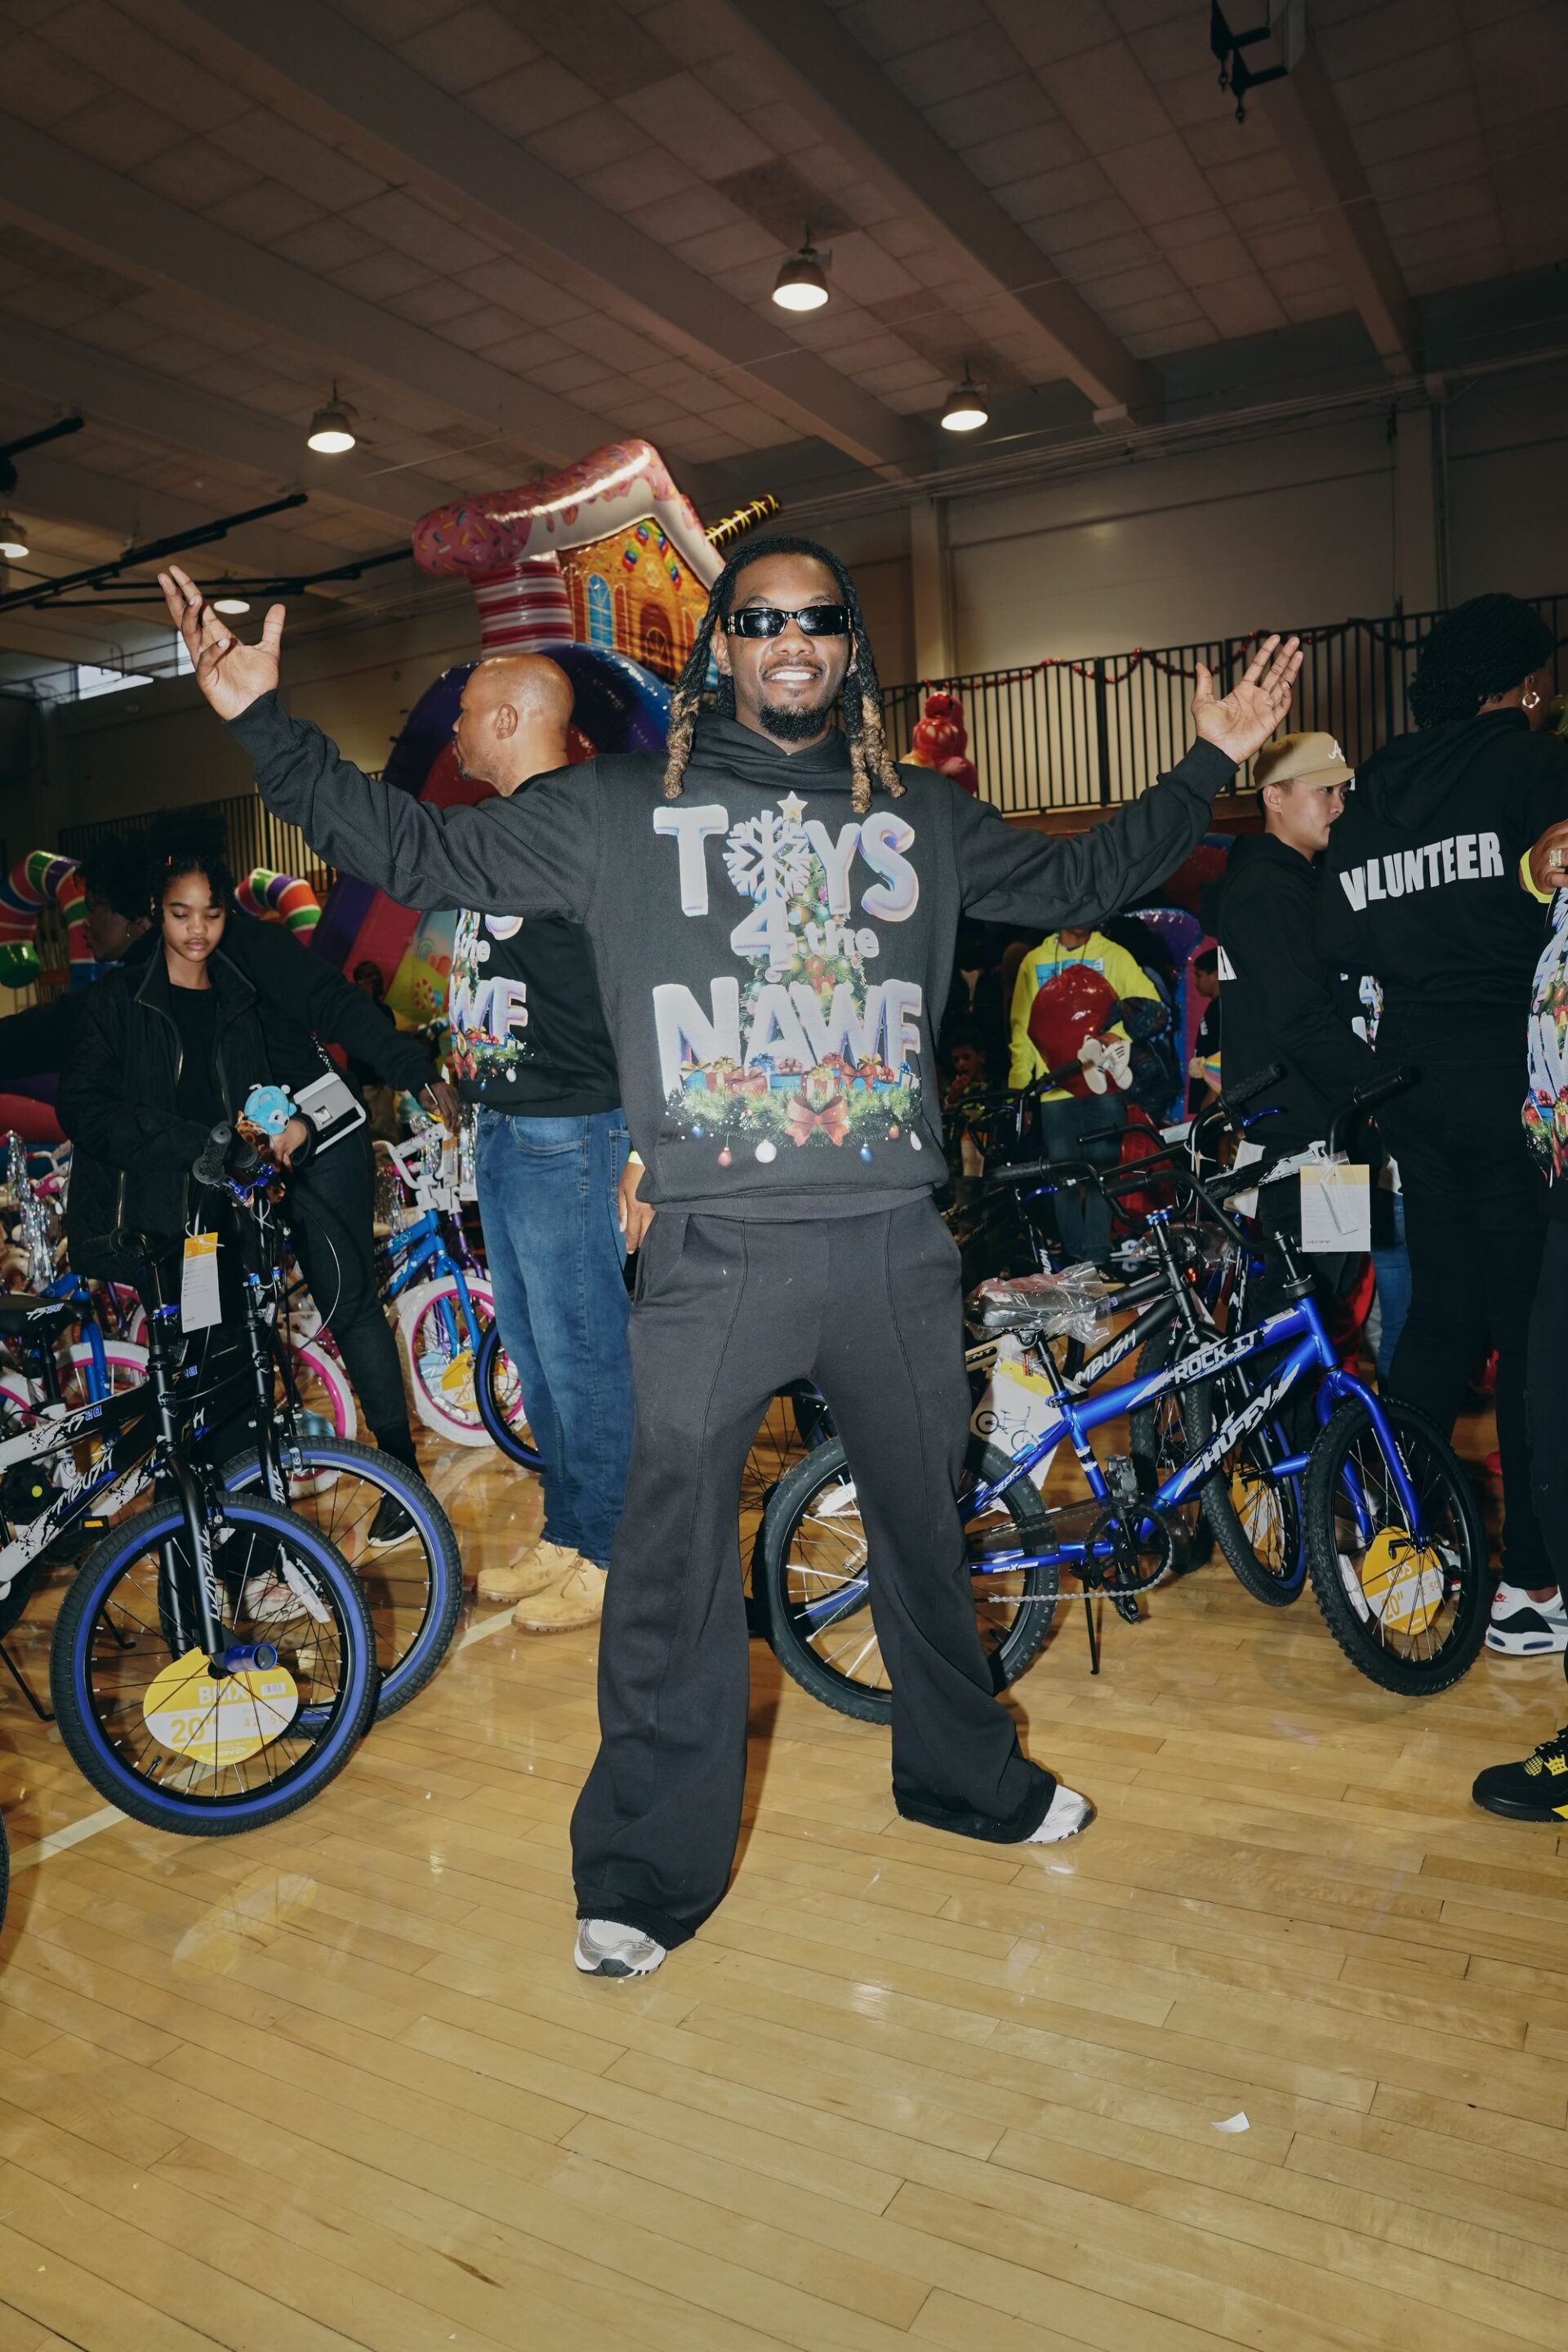 offset, toys 4 nawf, carnival, giveaway,